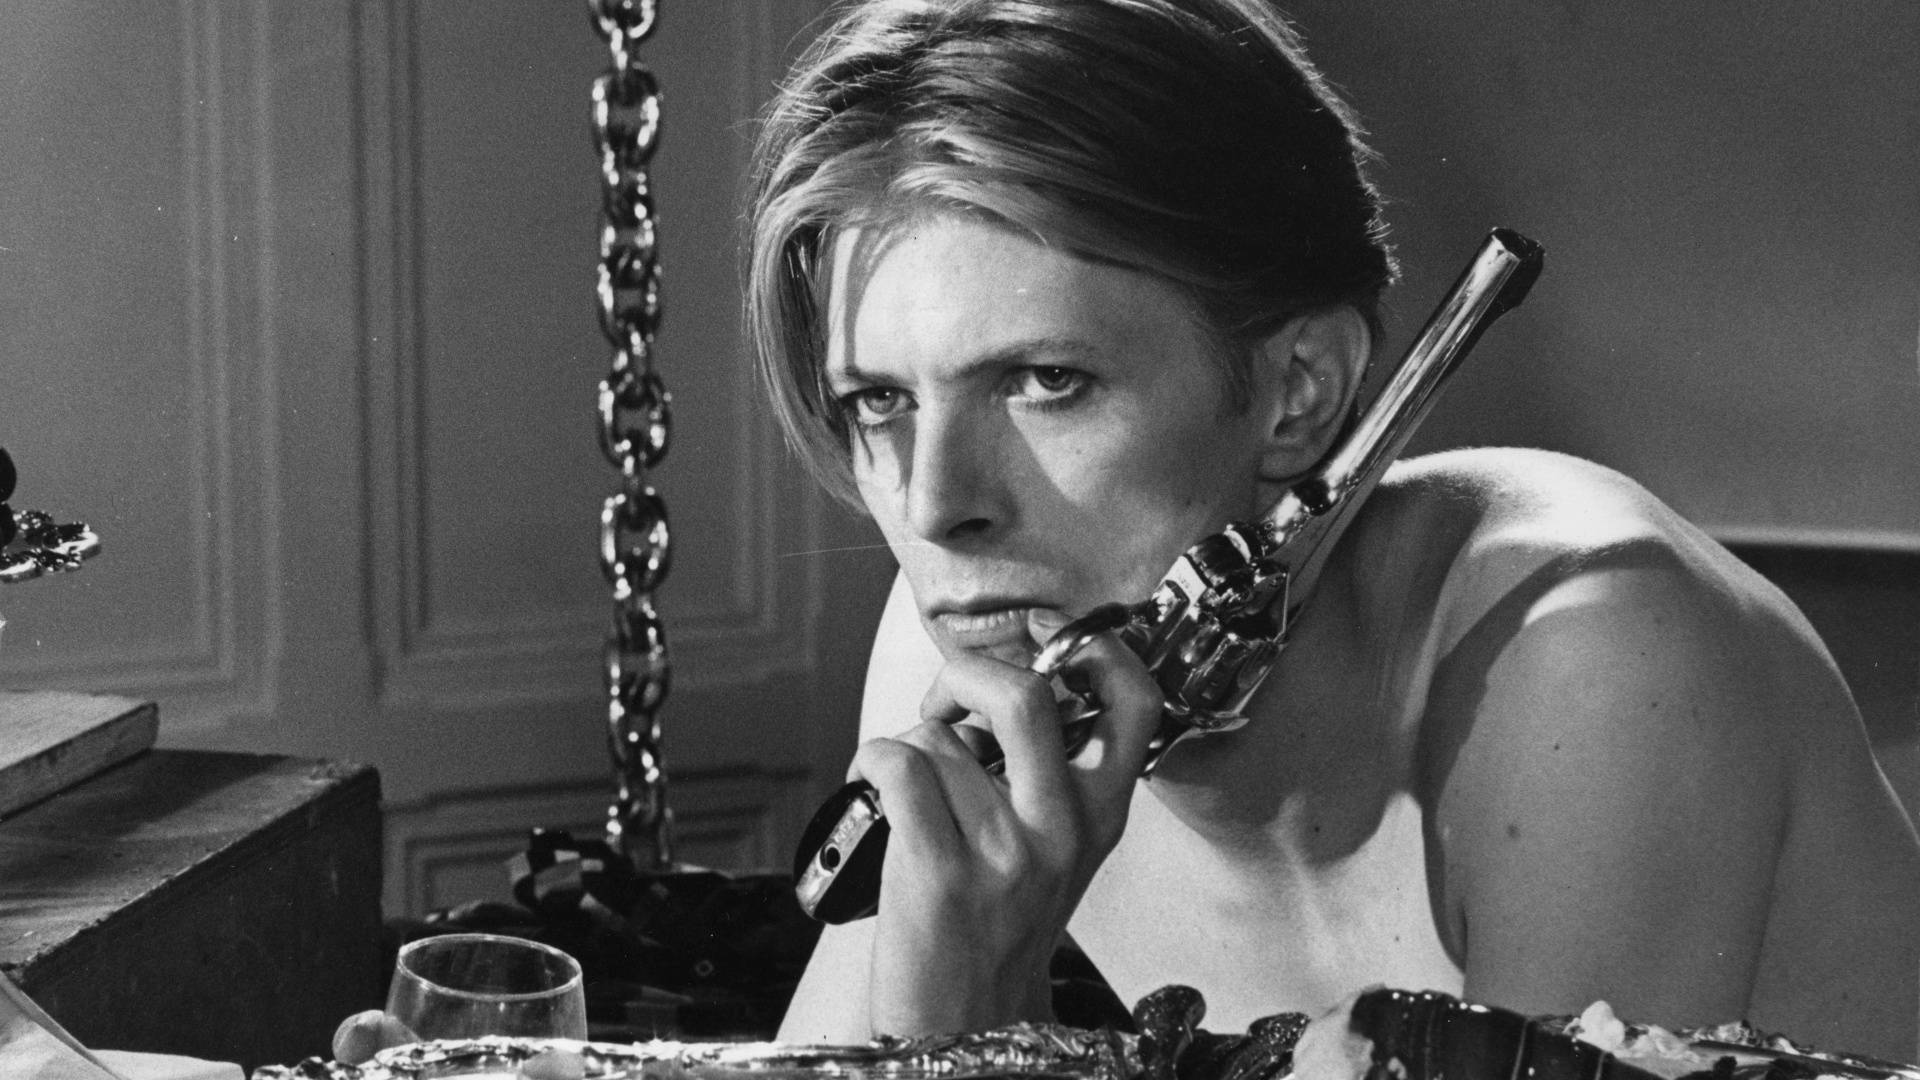 David Bowie With Pistol Wallpaper